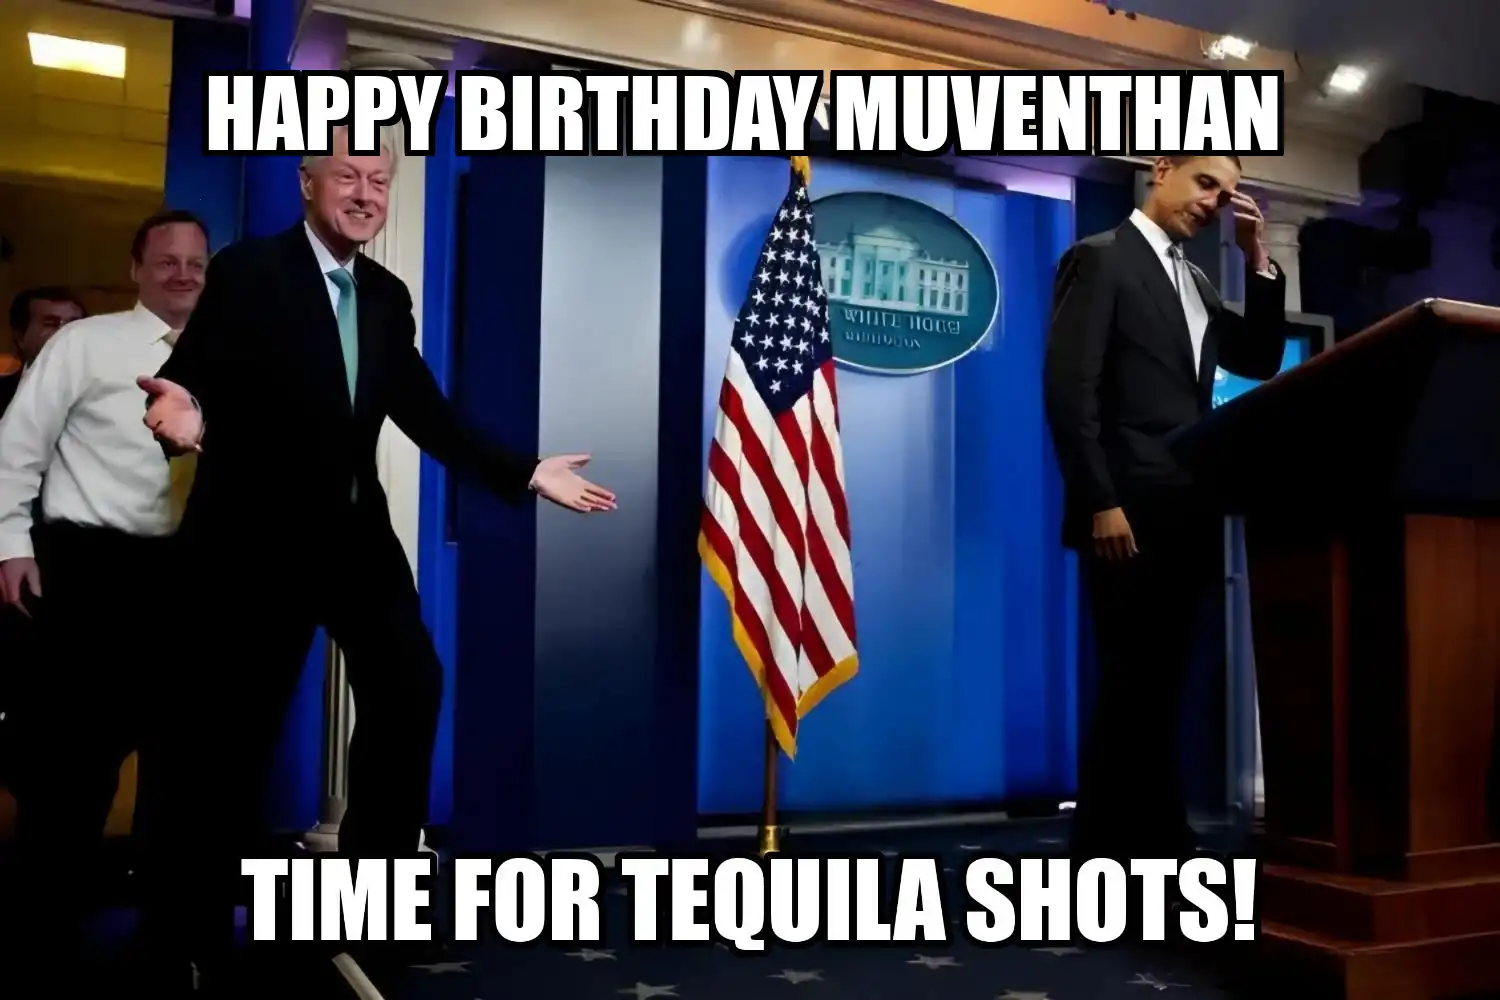 Happy Birthday Muventhan Time For Tequila Shots Memes